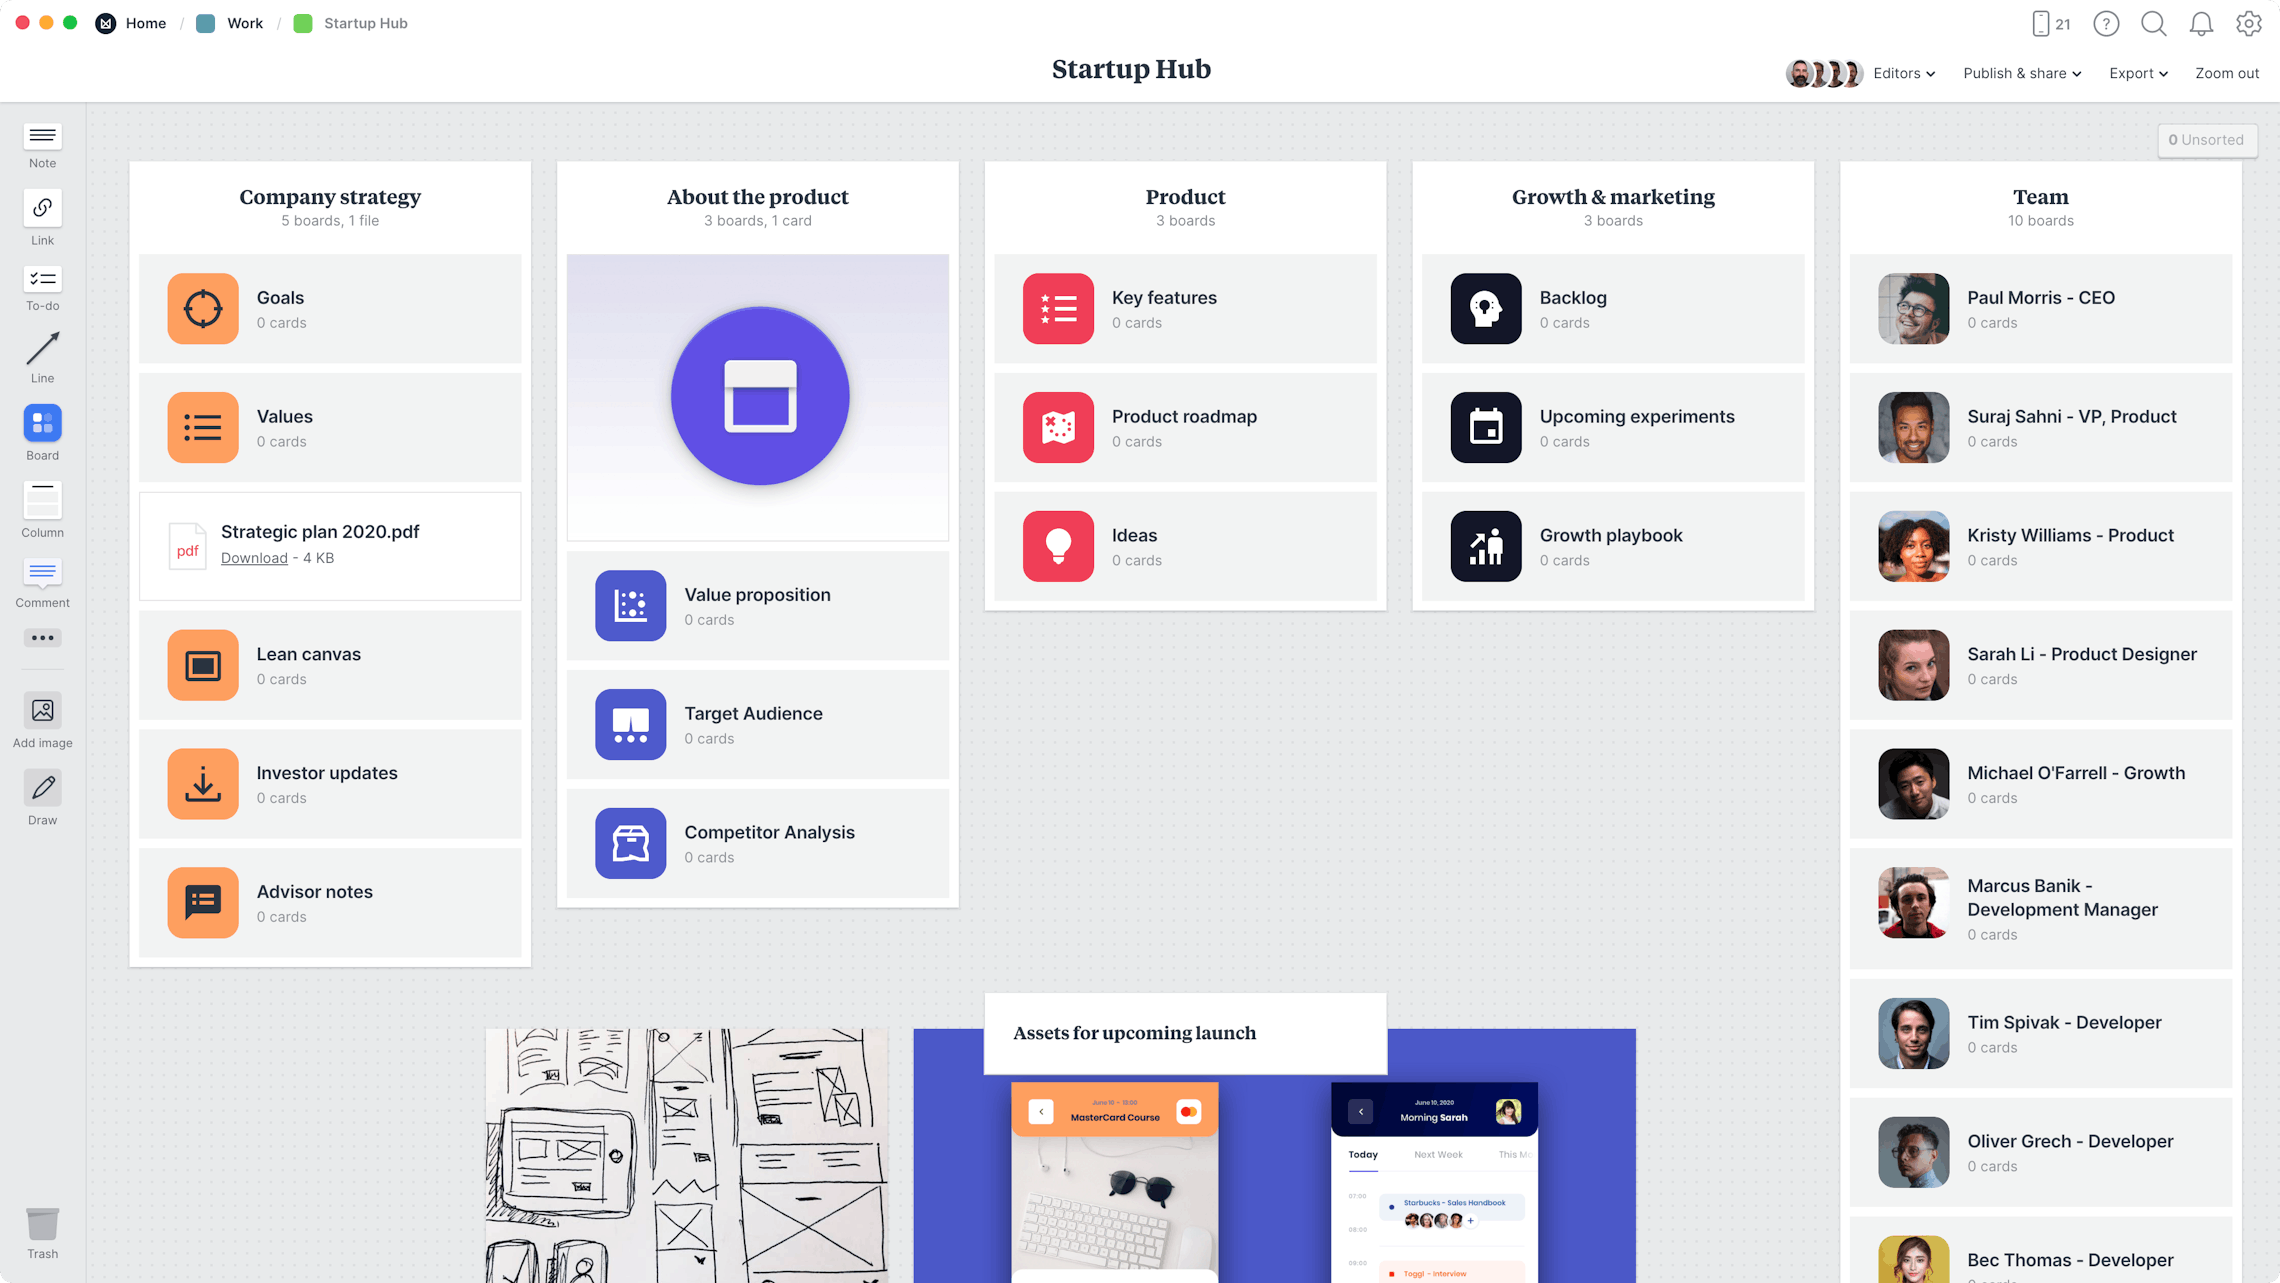 Startup Hub Template, within the Milanote app